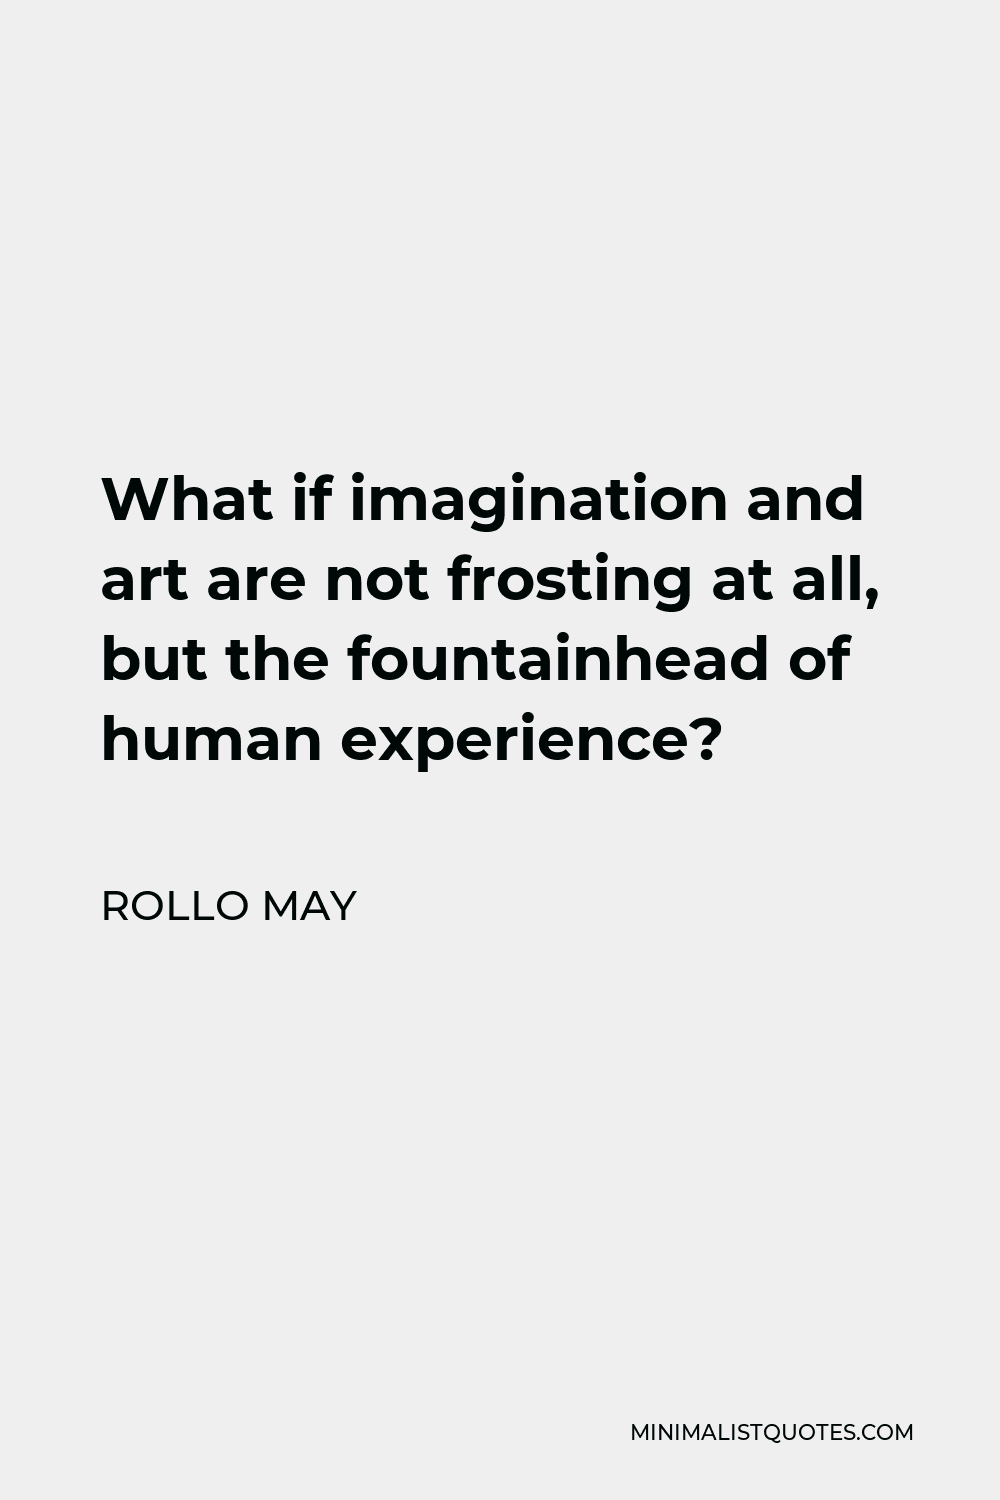 Rollo May Quote - What if imagination and art are not frosting at all, but the fountainhead of human experience?